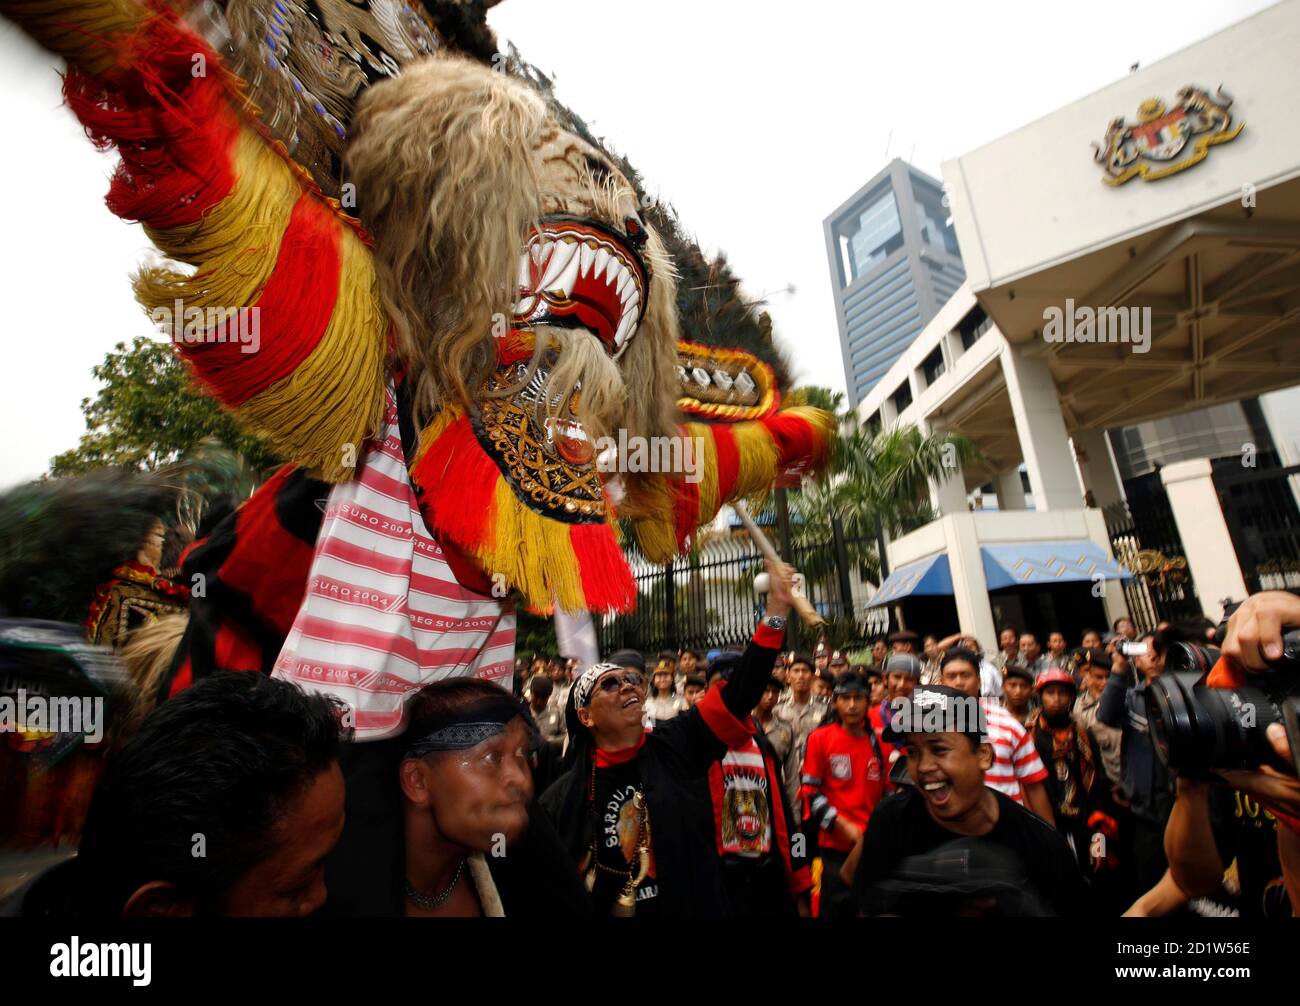 A Reog Ponorogo dancer performs during a protest outside Malaysia's embassy in Jakarta November 29, 2007. Hundreds of Indonesian Reog Ponorogo dancers held a colourful protest outside the Malaysian embassy as a new dispute erupted between the two neighbours over cultural heritage. REUTERS/Beawiharta (INDONESIA) Foto de stock